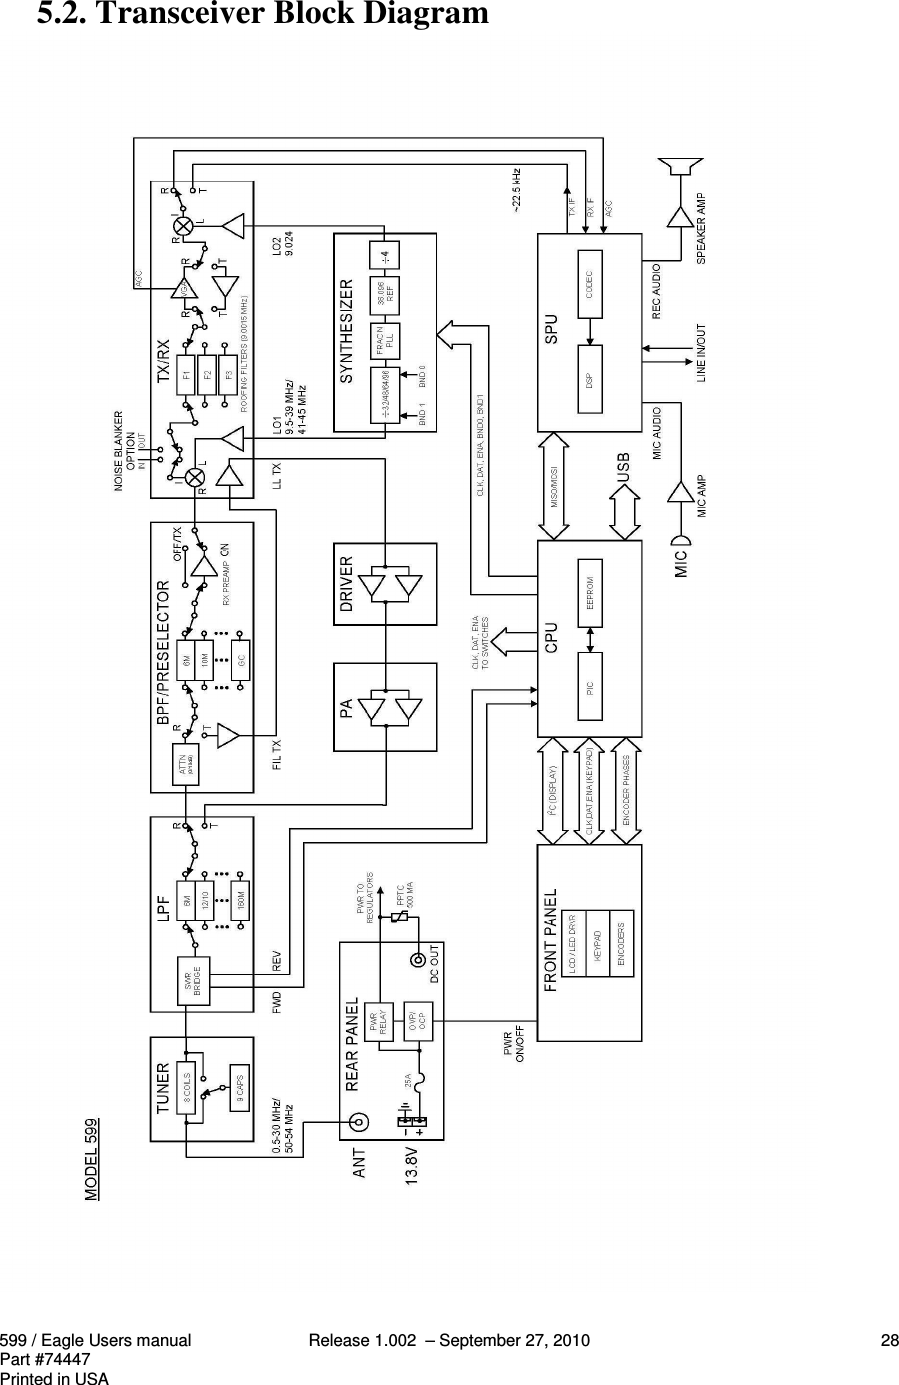 599 / Eagle Users manual Release 1.002  – September 27, 2010 28Part #74447Printed in USA5.2. Transceiver Block Diagram